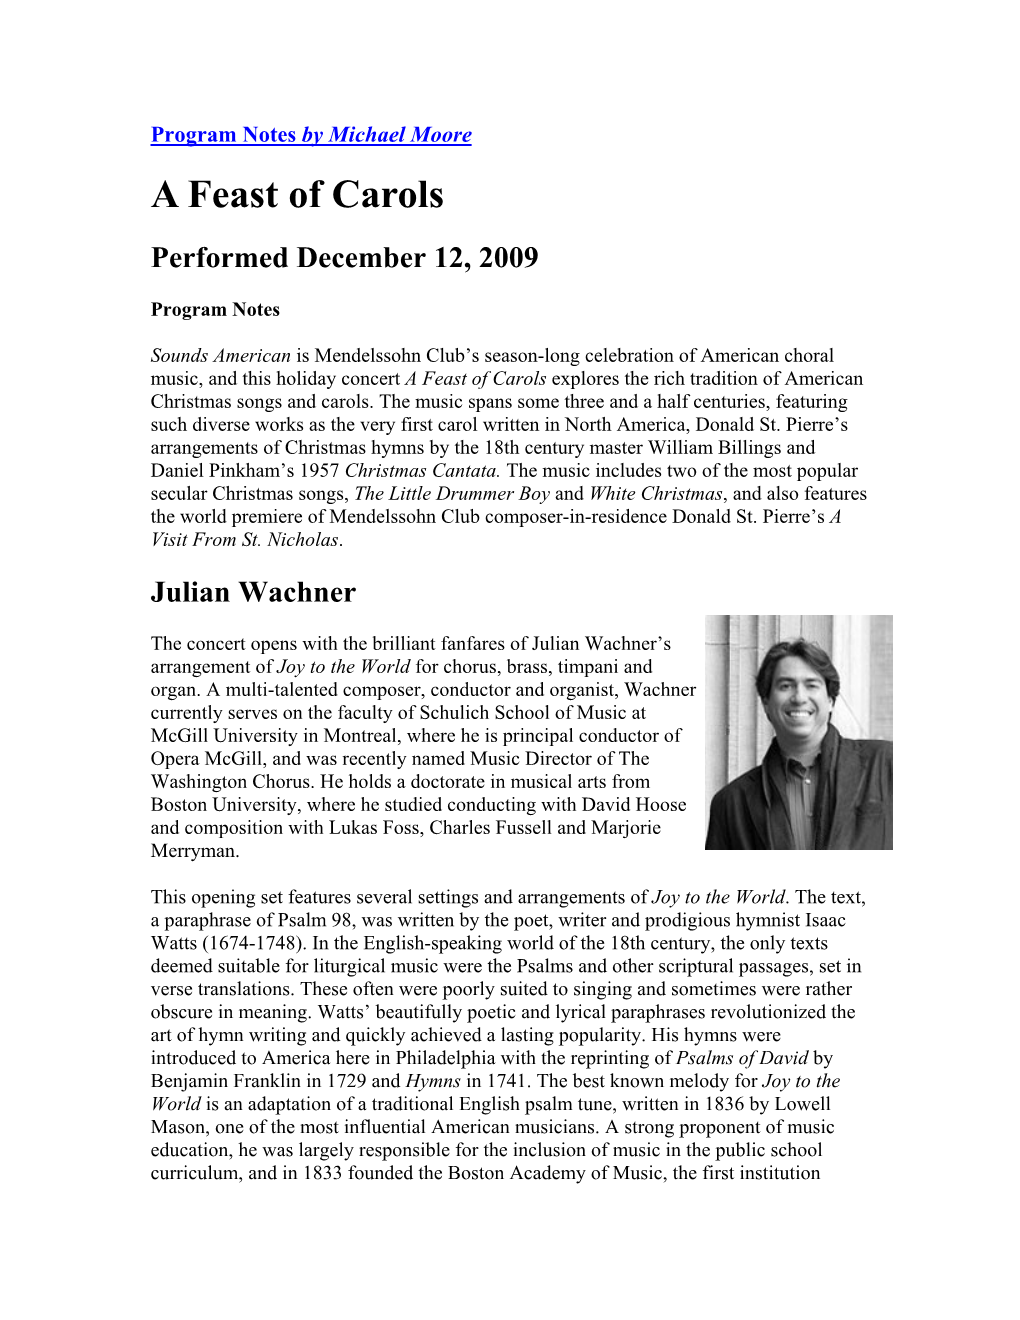 Program Notes by Michael Moore a Feast of Carols Performed December 12, 2009